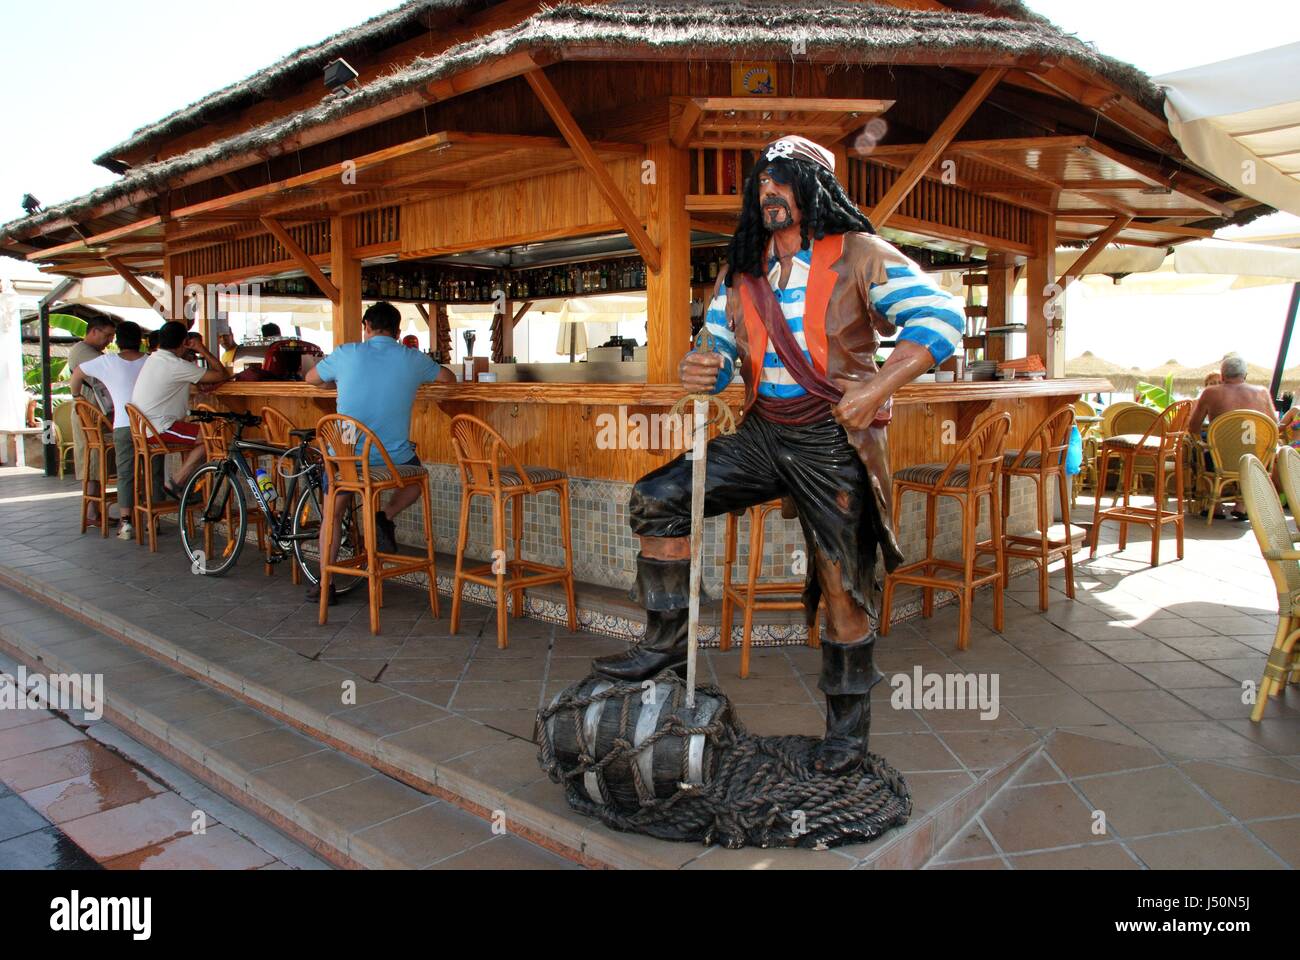 Tourists relaxing at a beach bar along the promenade with a pirate statue in the foreground, Torremolinos, Malaga Province, Andalusia, Spain, Western  Stock Photo